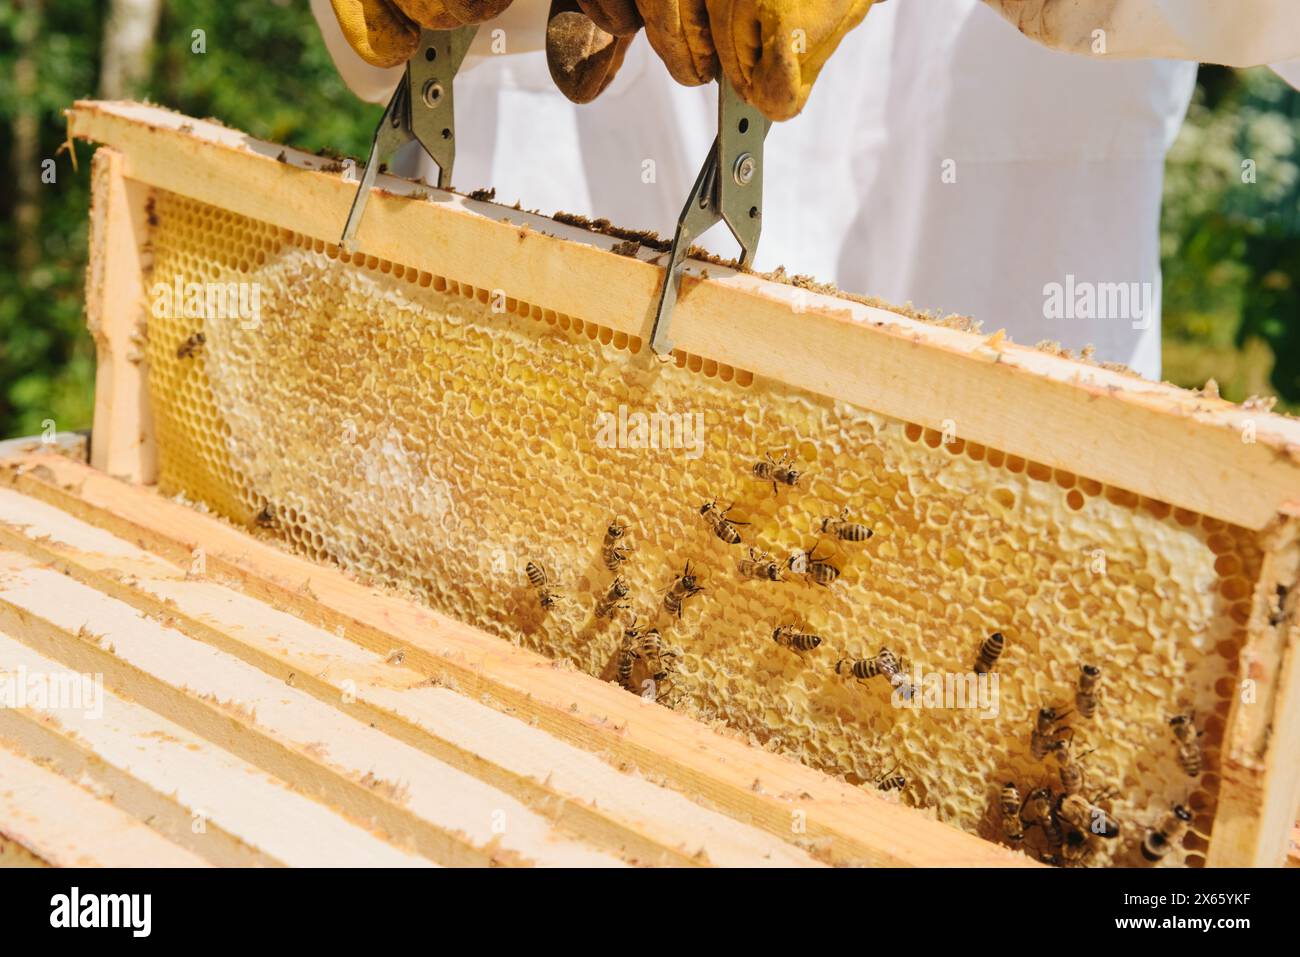 beekeeper takes honeycombs from the hive, harvest honey Stock Photo